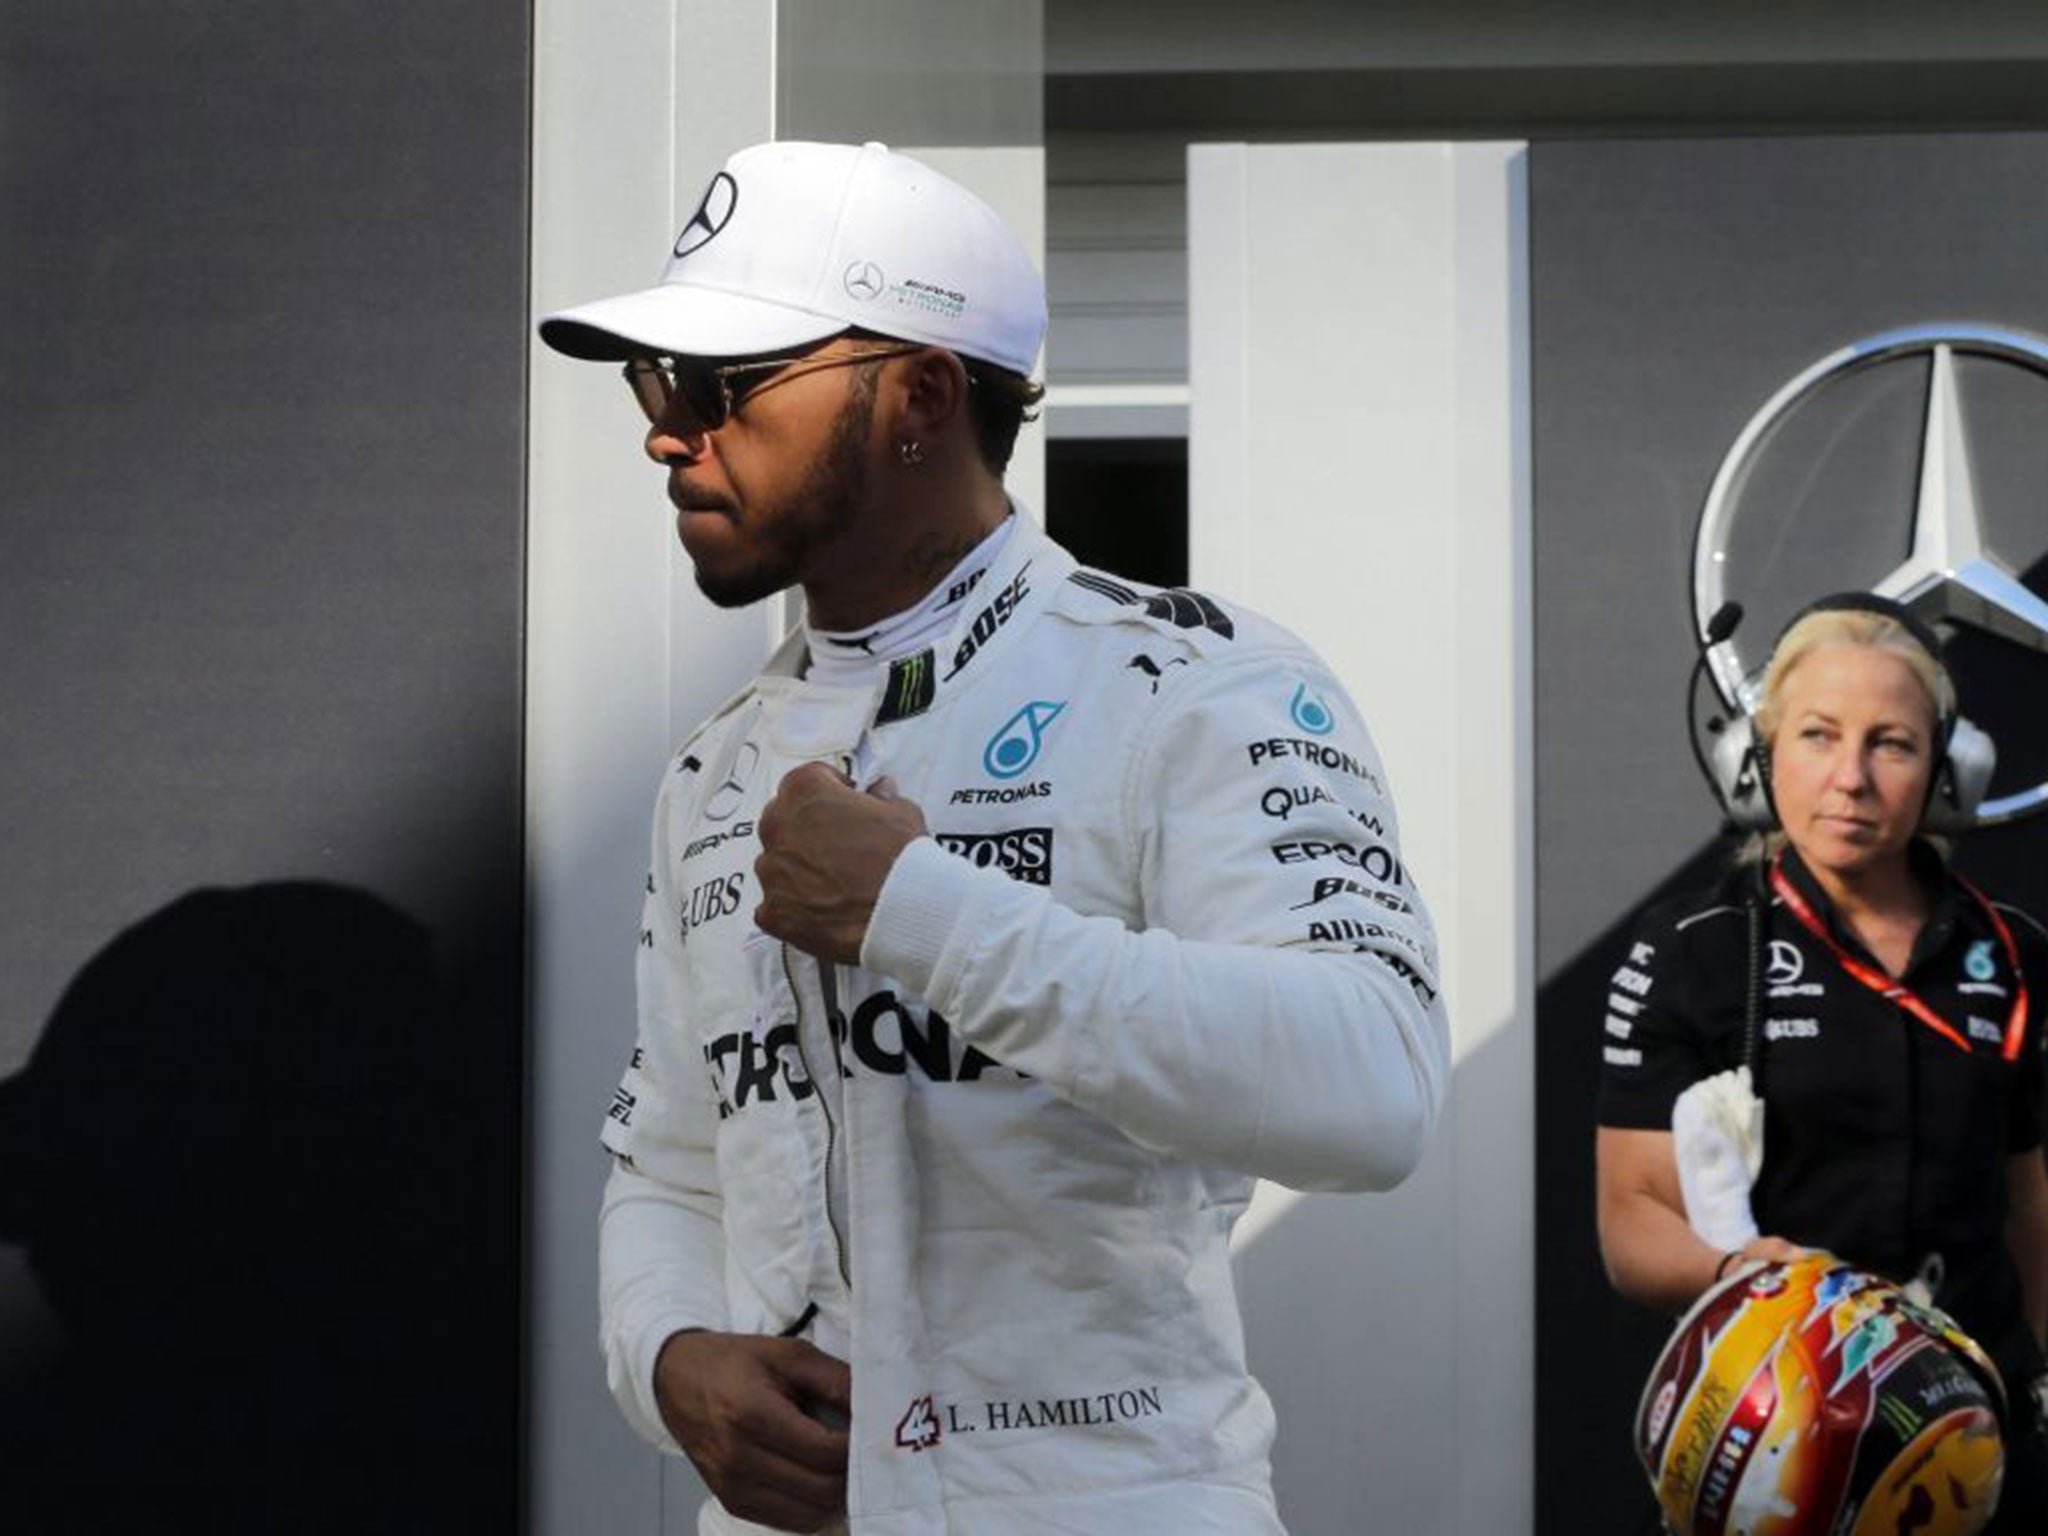 Lewis Hamilton's current contract with Mercedes expires in 2018